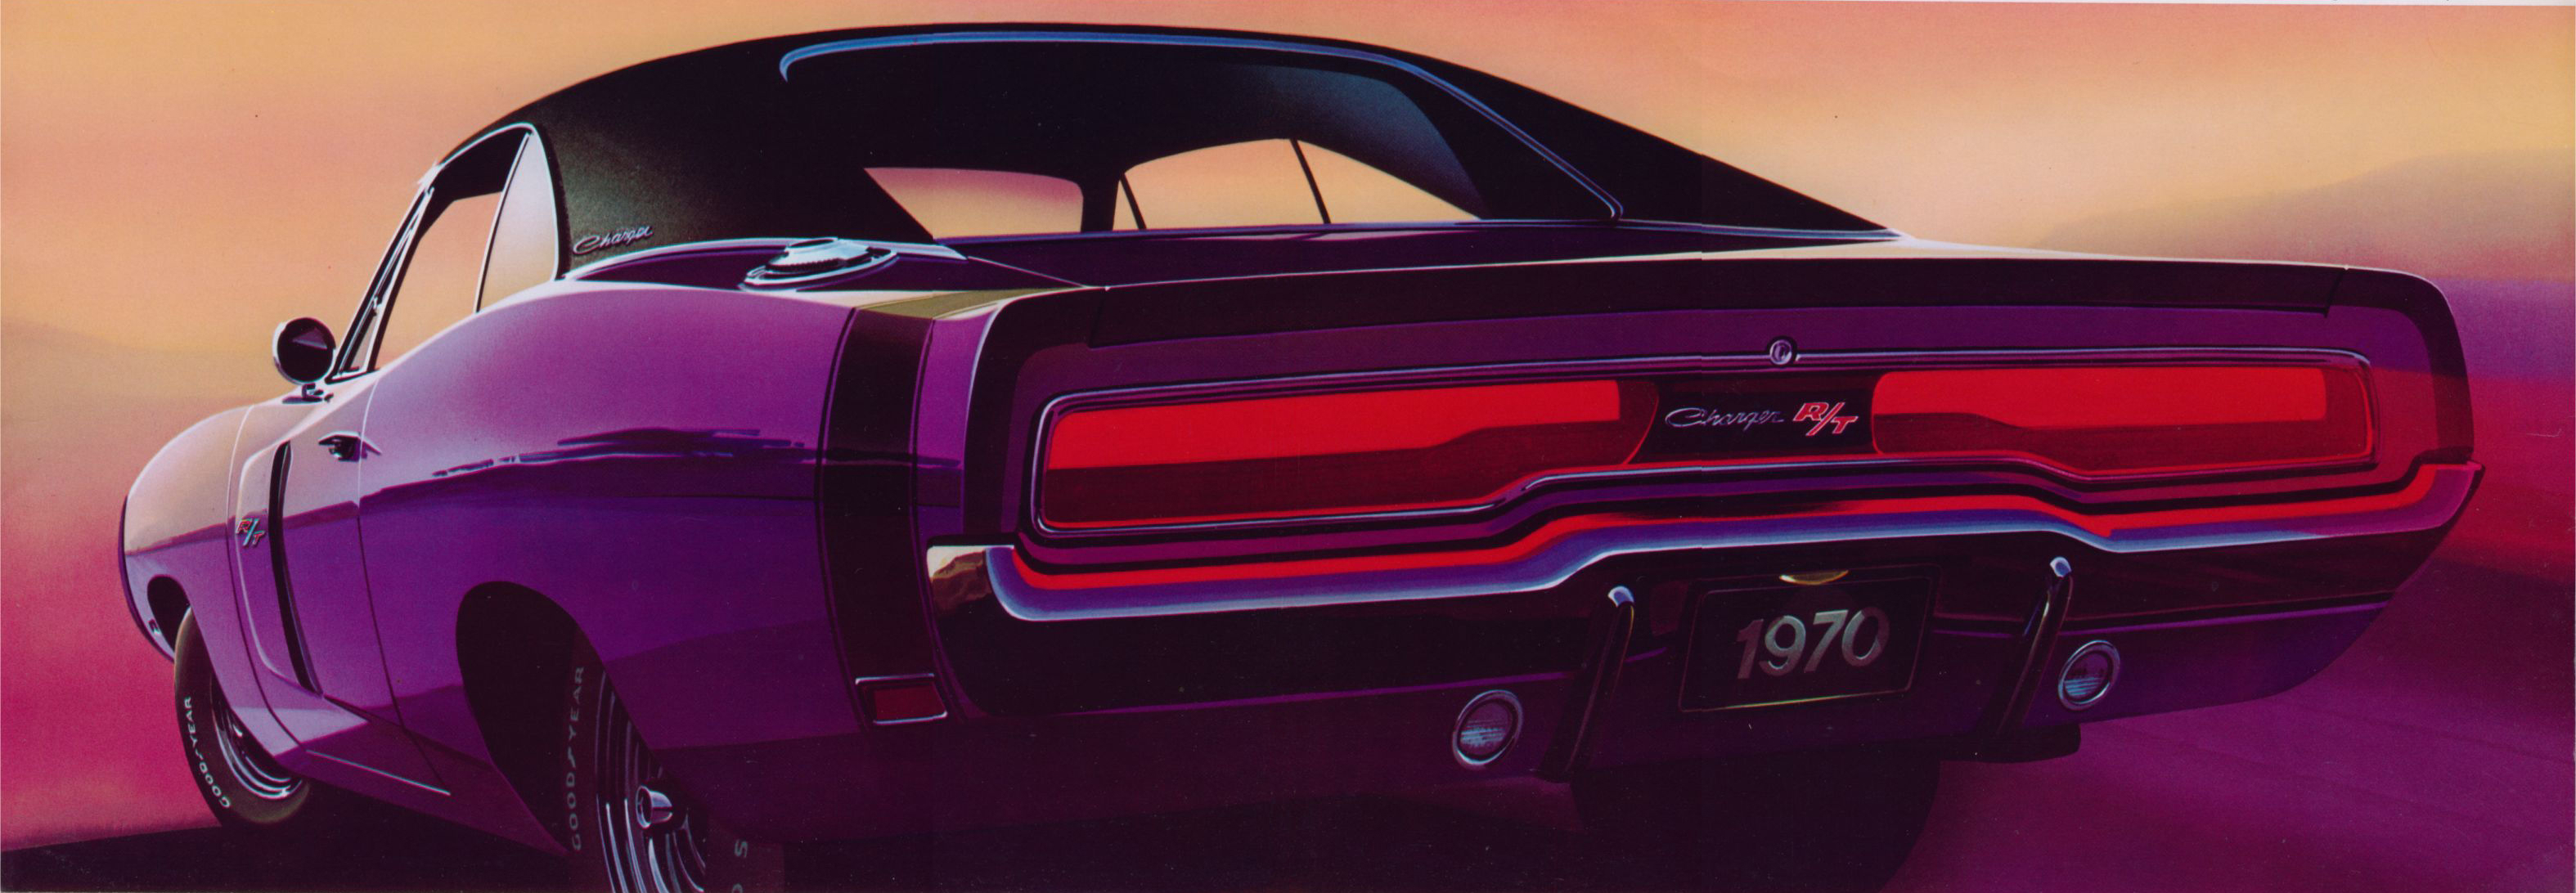 Vehicles Dodge Charger 3149x1092